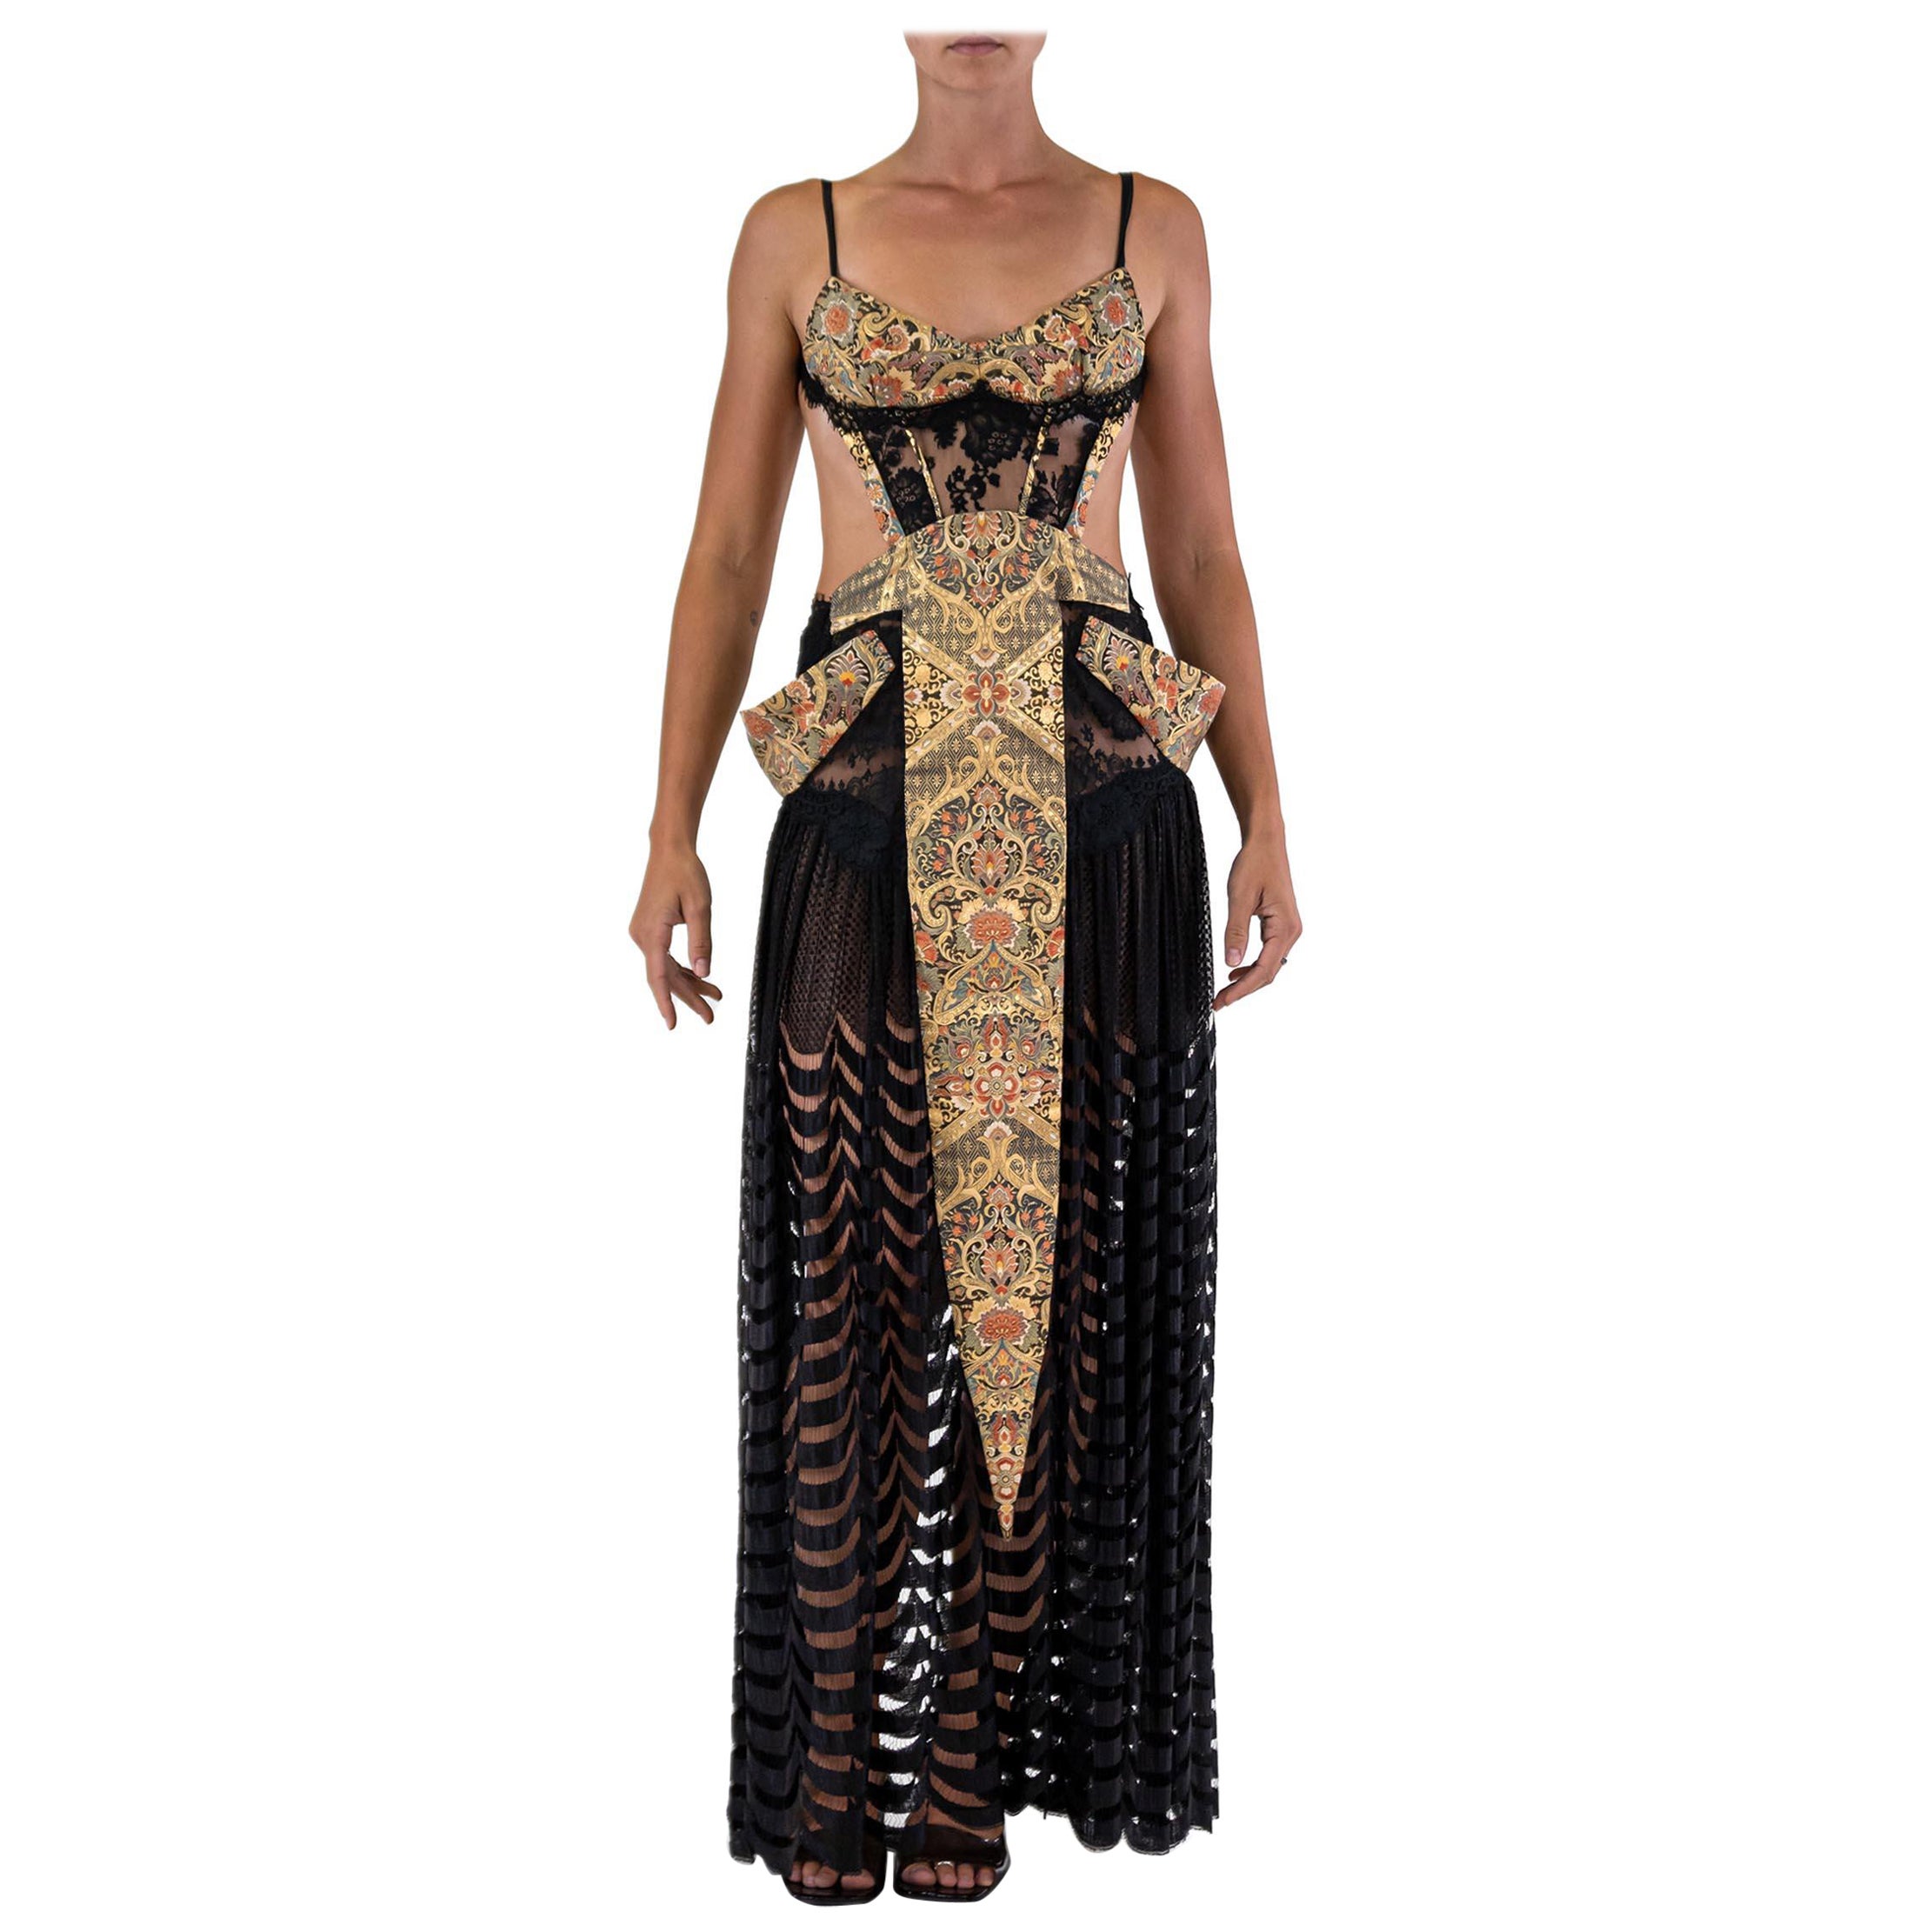 MORPHEW ATELIER Black 1920S Lace Gown With Hand Woven Japanese Metallic Gold Obi For Sale